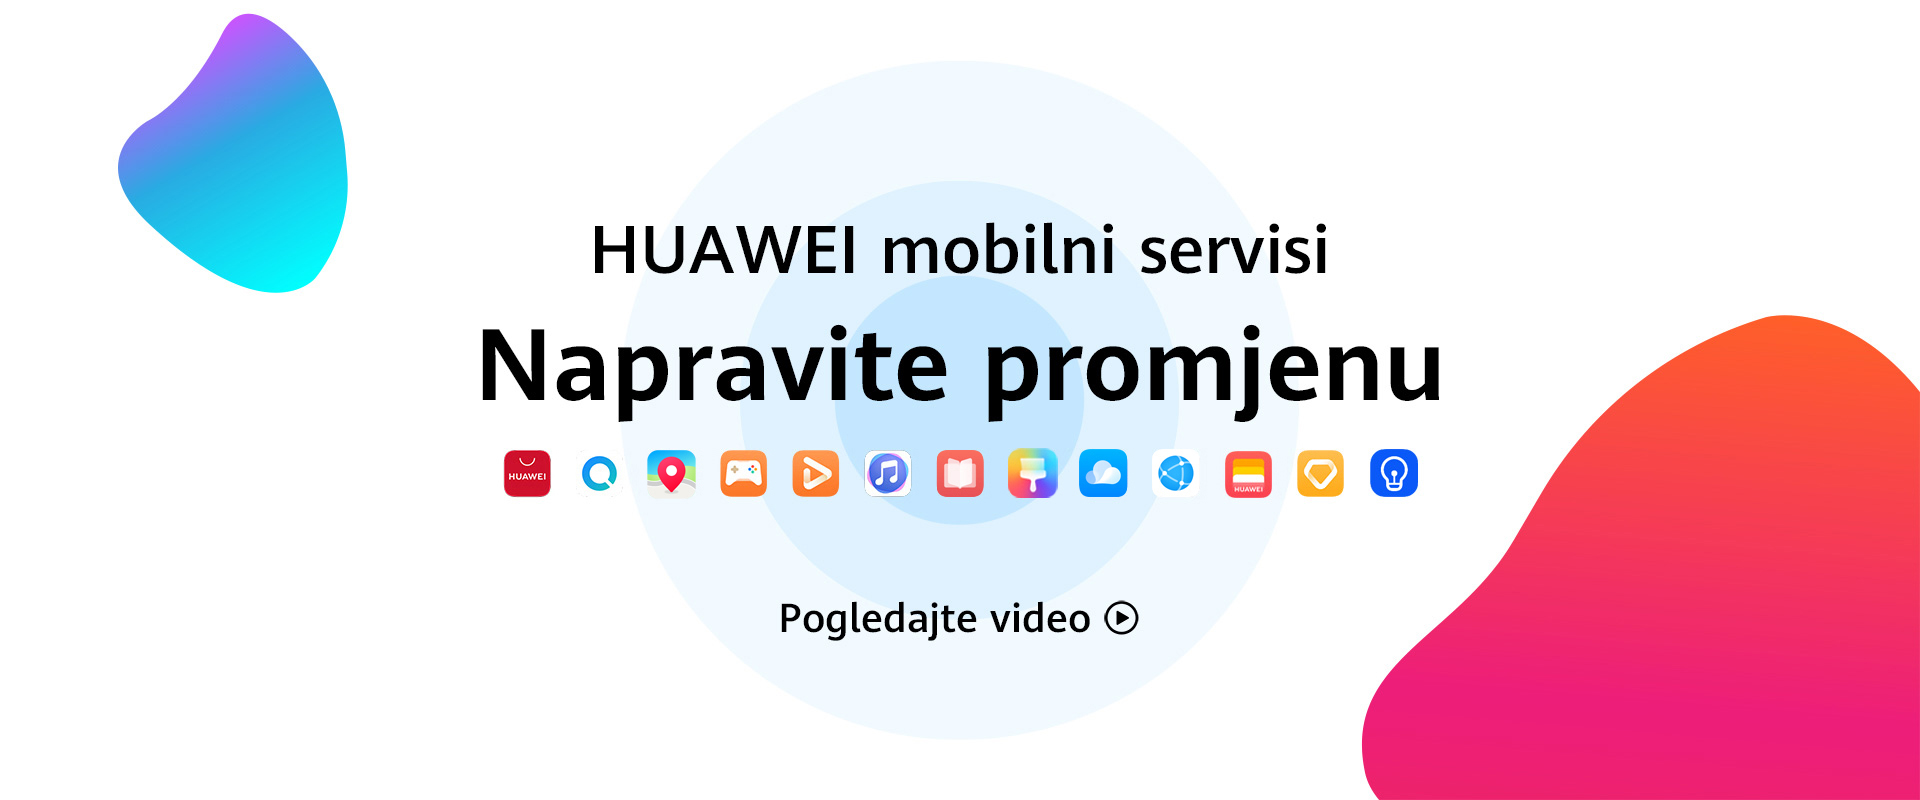 Huawei mobile services